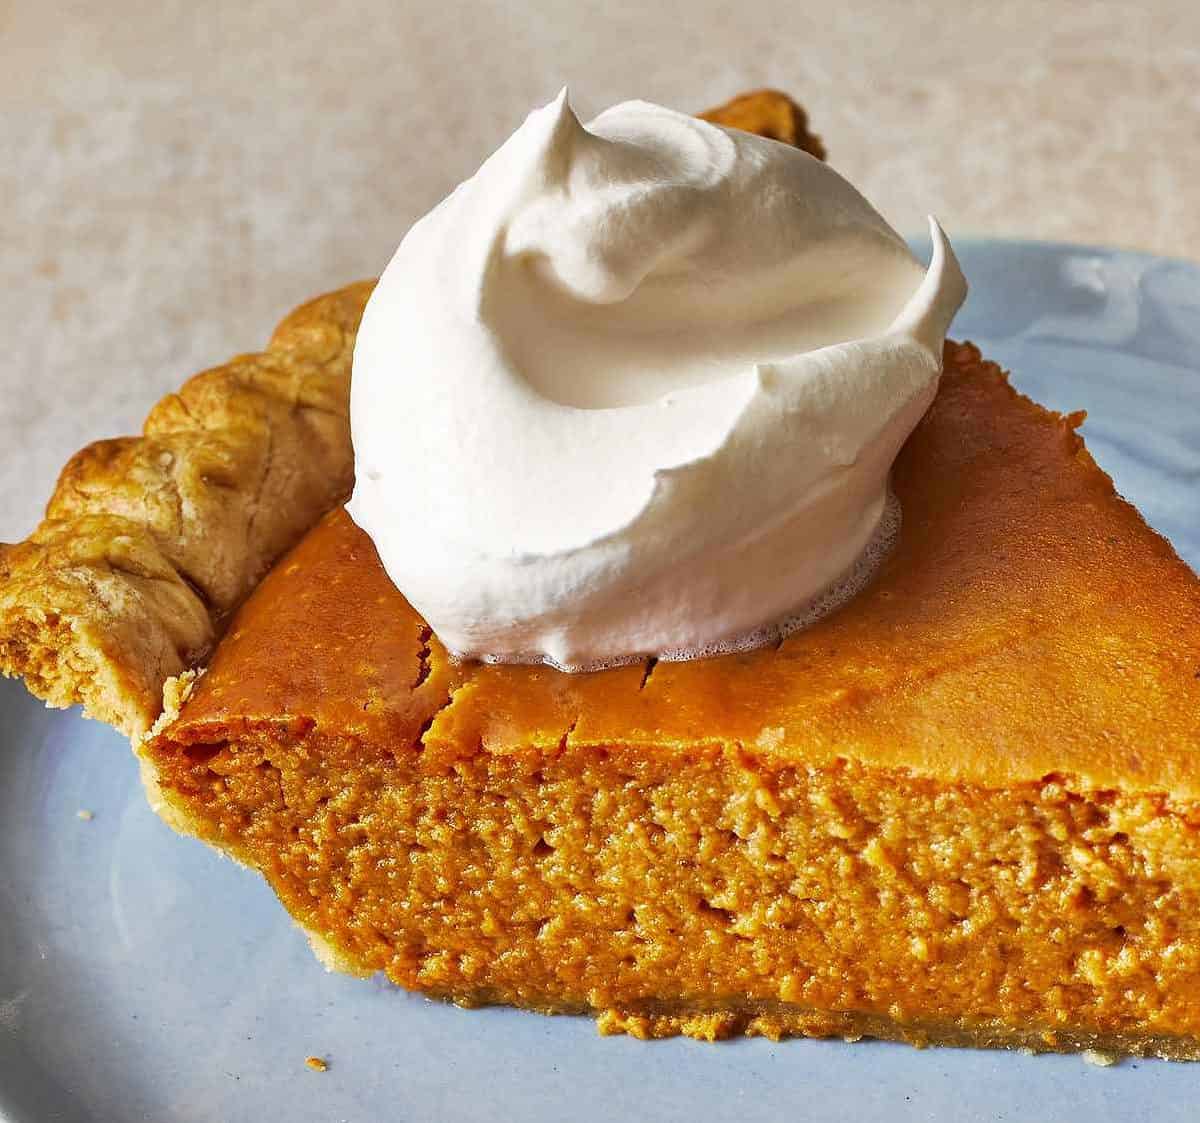  Spice up your life with this pumpkin pie